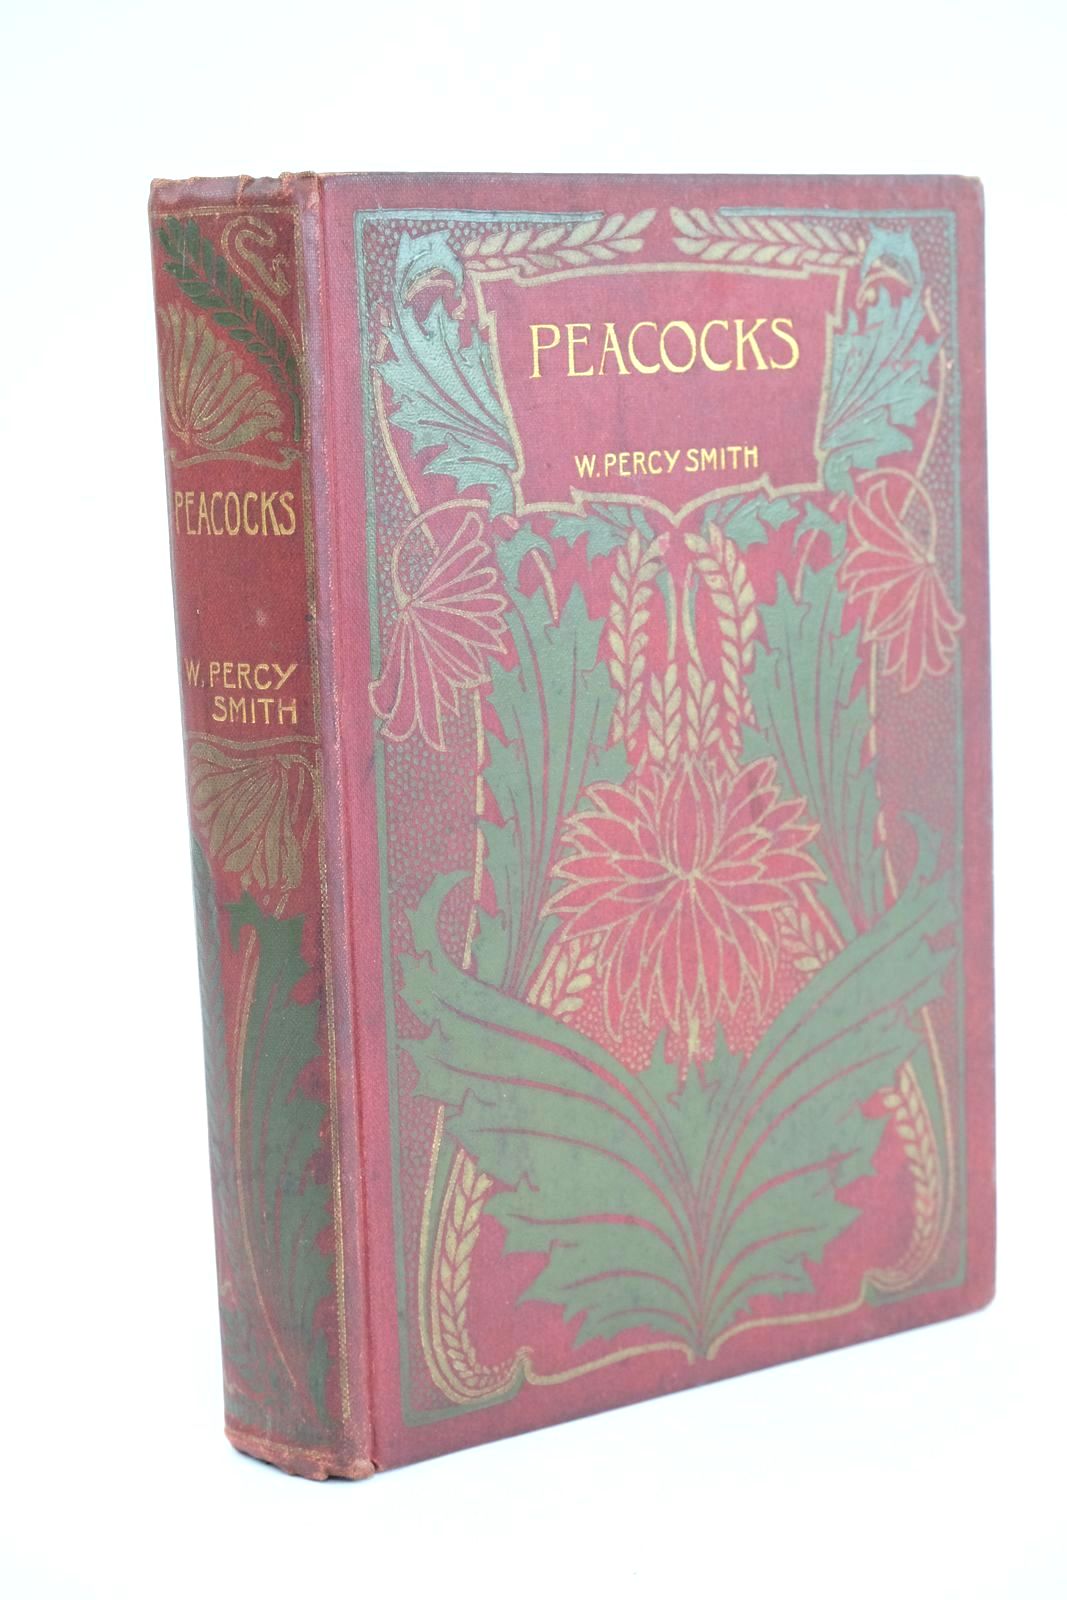 Photo of PEACOCKS OR WHAT LITTLE HANDS CAN DO written by Smith, W. Percy illustrated by Hardy, Paul published by Blackie & Son Ltd. (STOCK CODE: 1325340)  for sale by Stella & Rose's Books